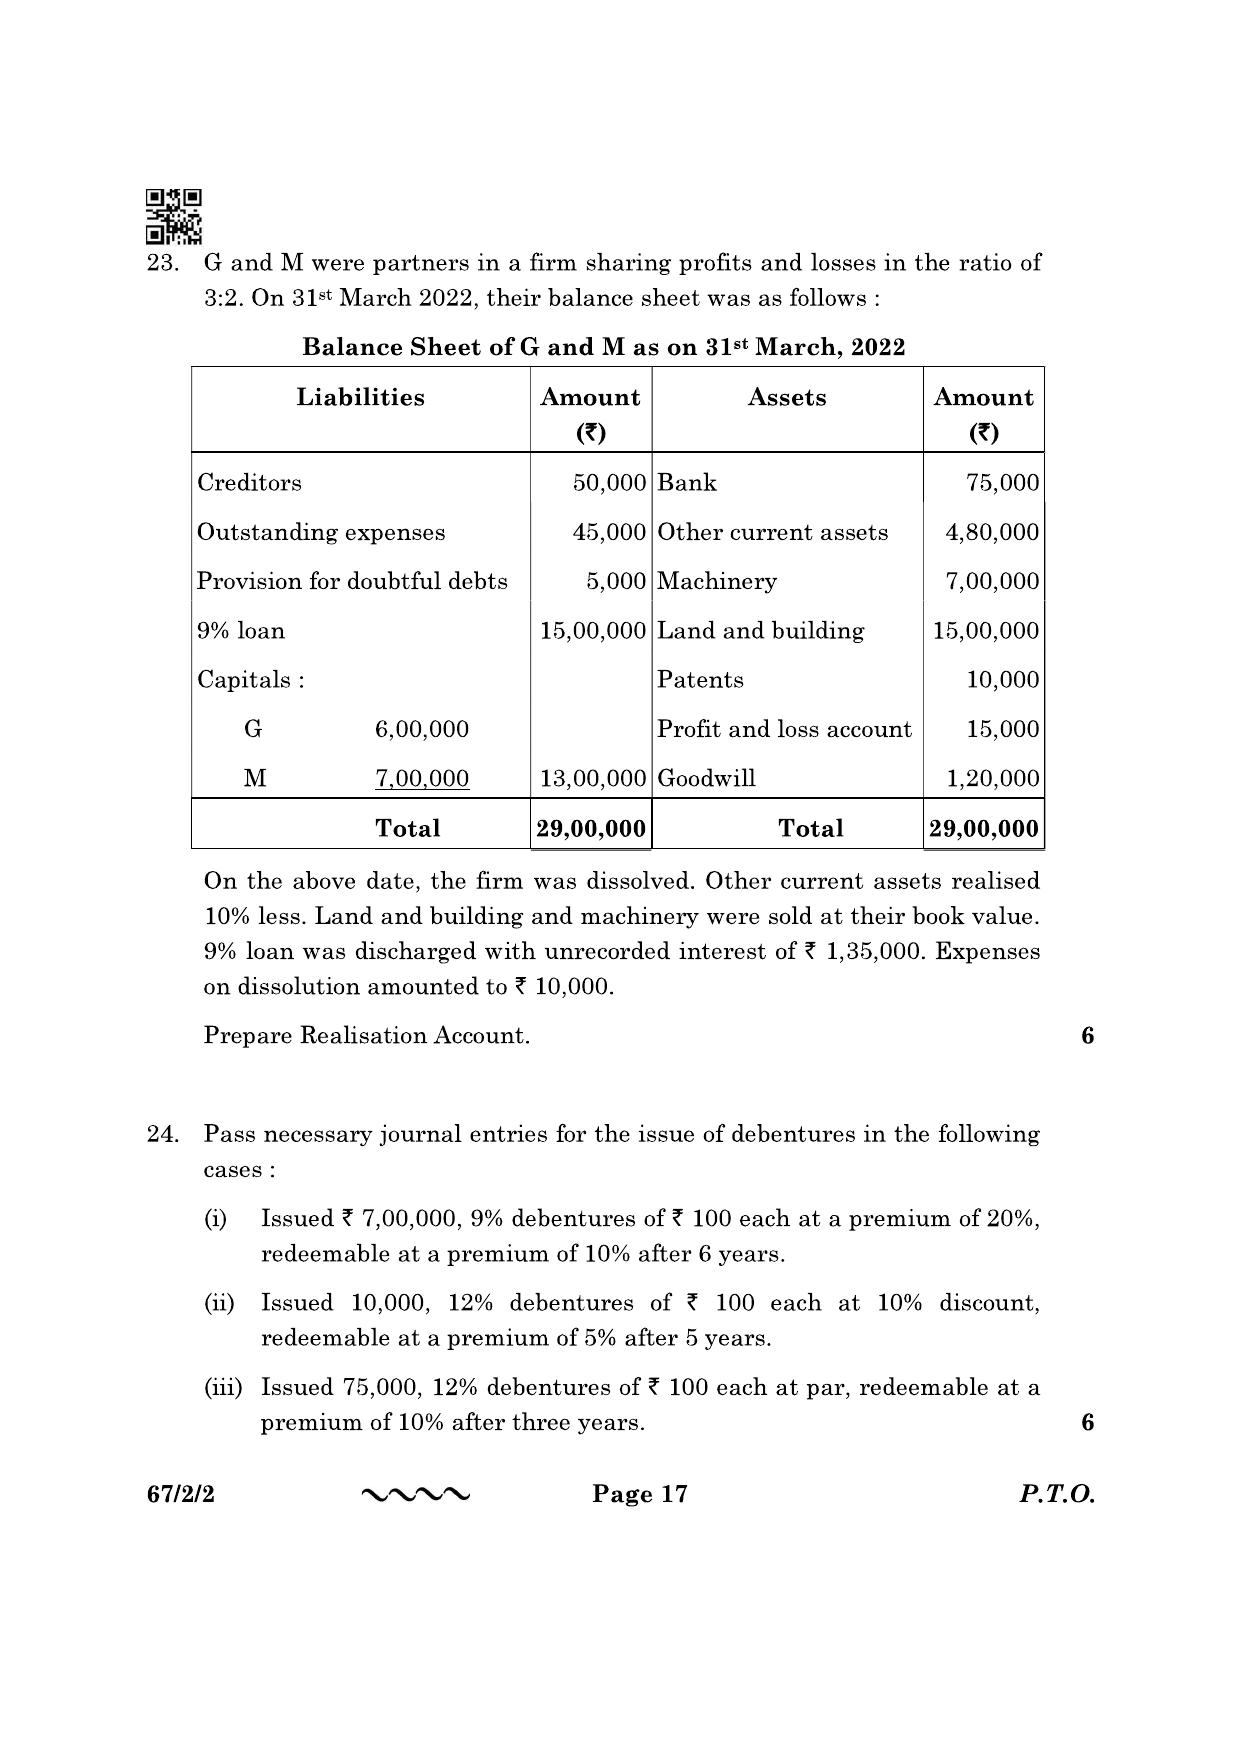 CBSE Class 12 67-2-2 Accountancy 2023 Question Paper - Page 17